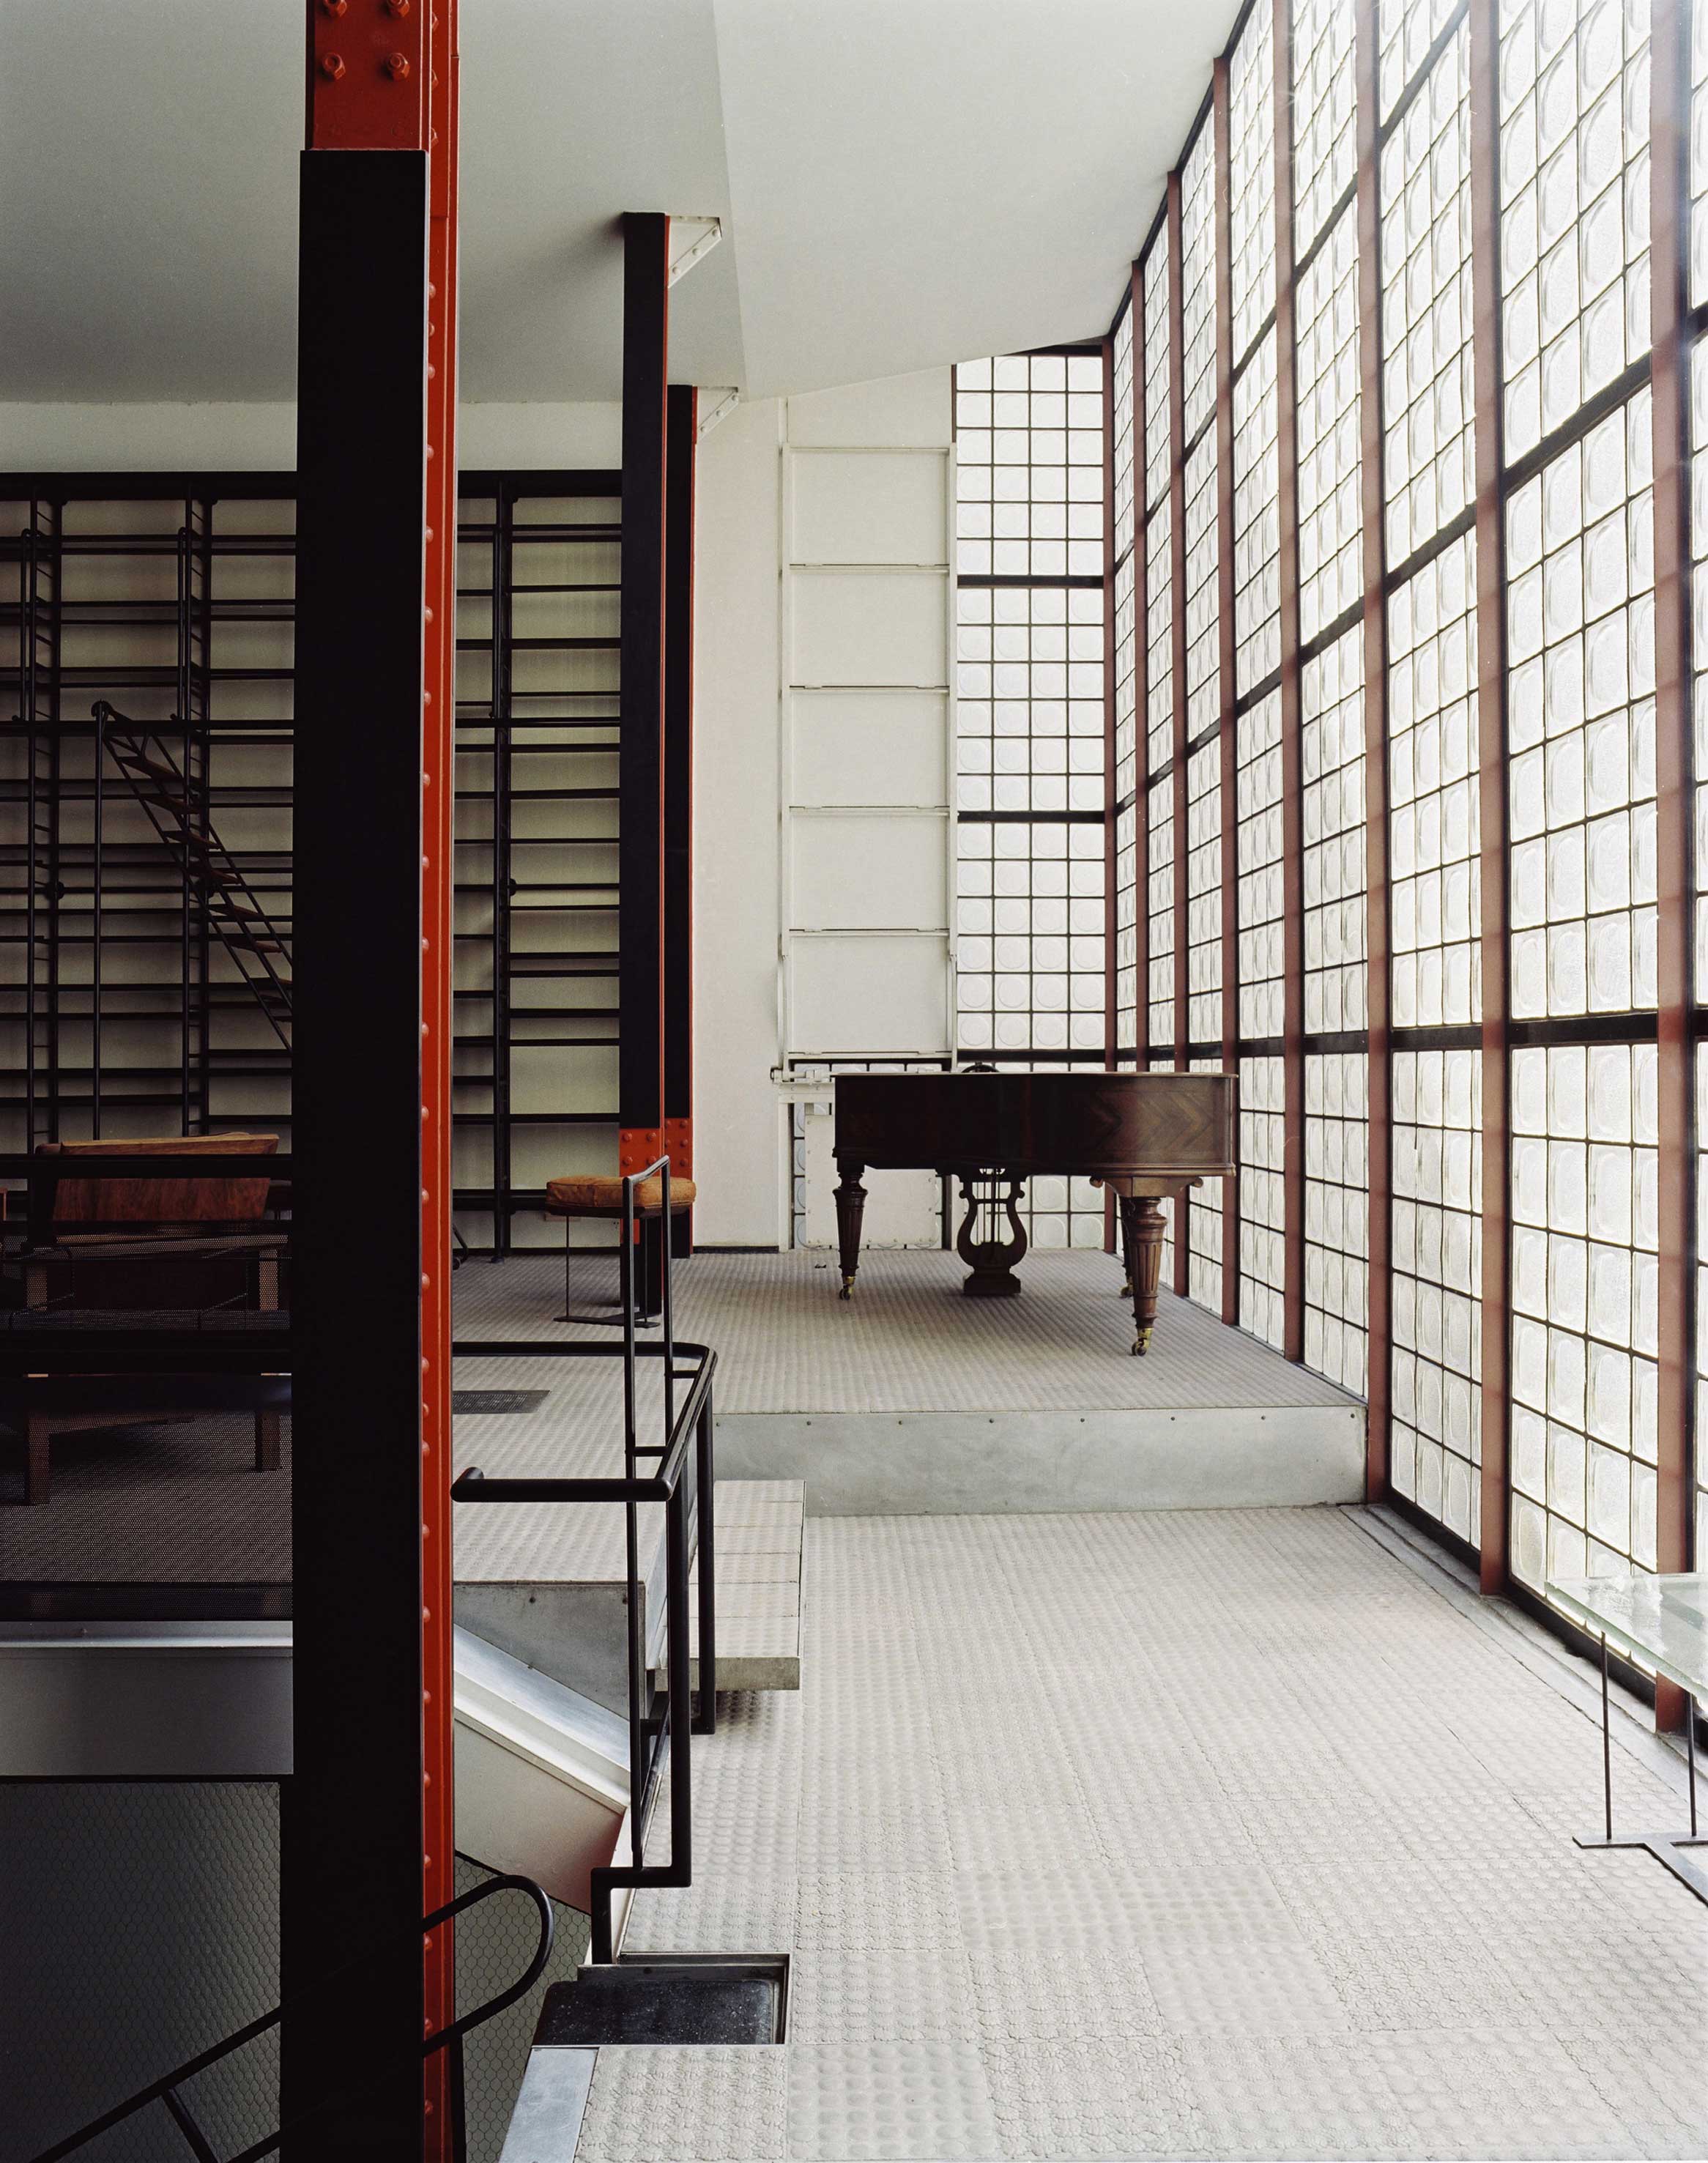 A view of the interior of the Maison de Verre (photo courtesy of Mary Vaughan Johnson)